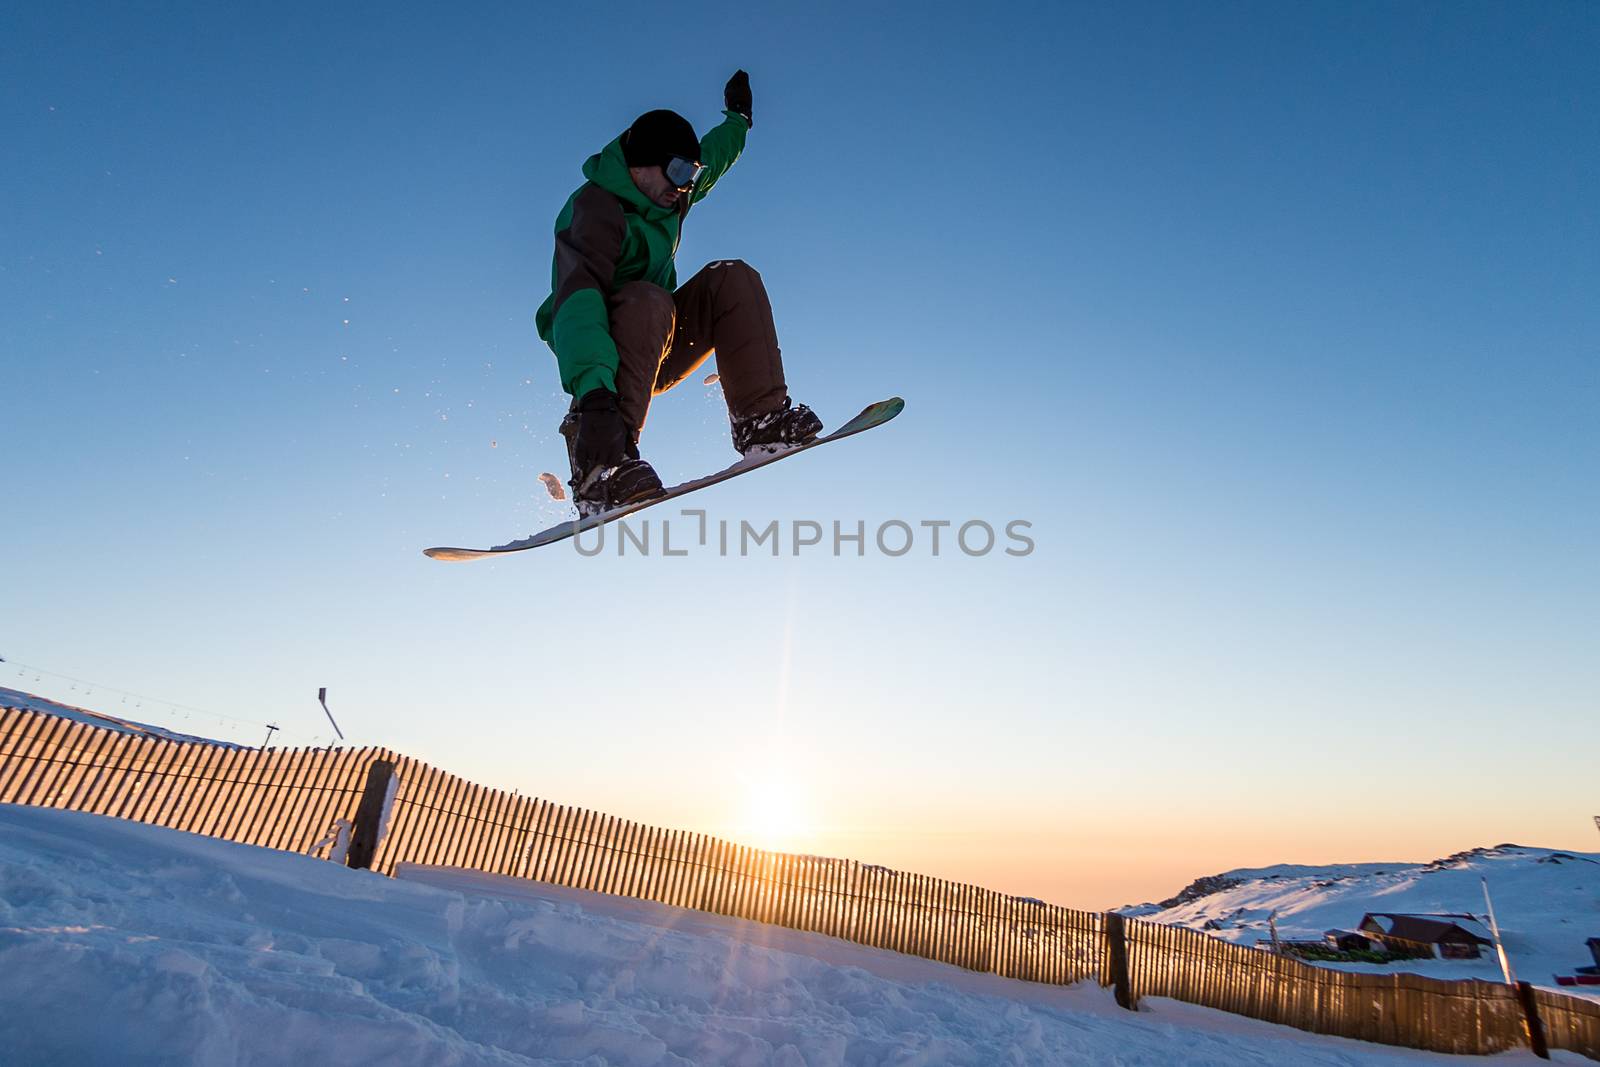 Snowboarder at jump in mountains at sunset sky.